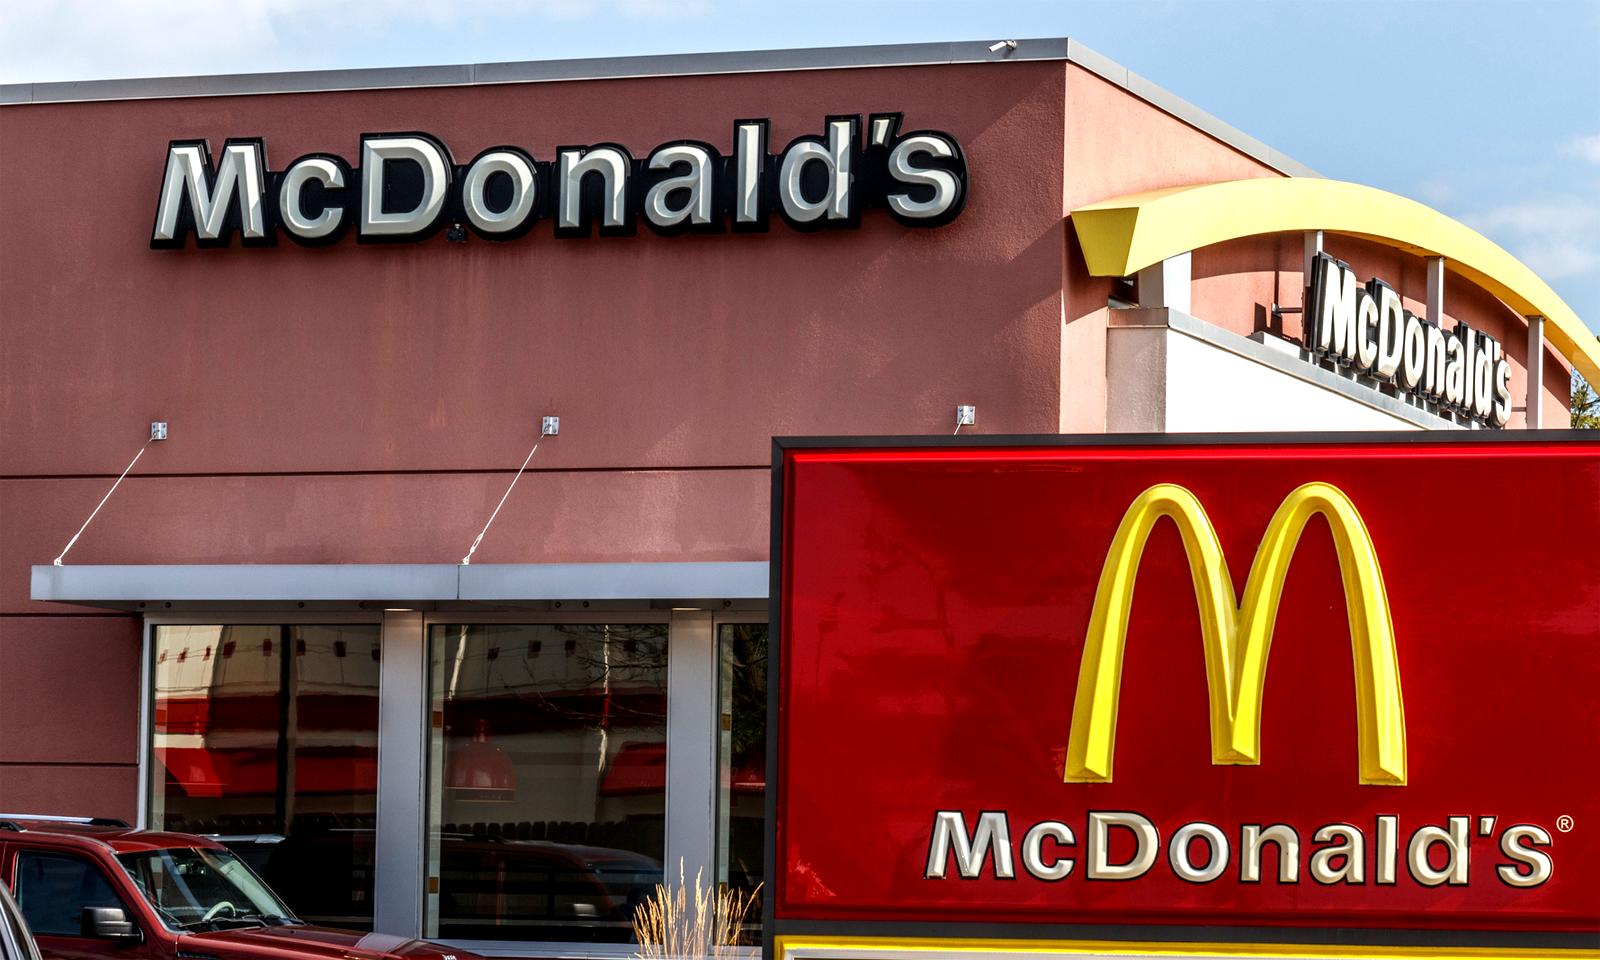 McDonald's Called Out For Not Having $1 Items on Dollar Menu